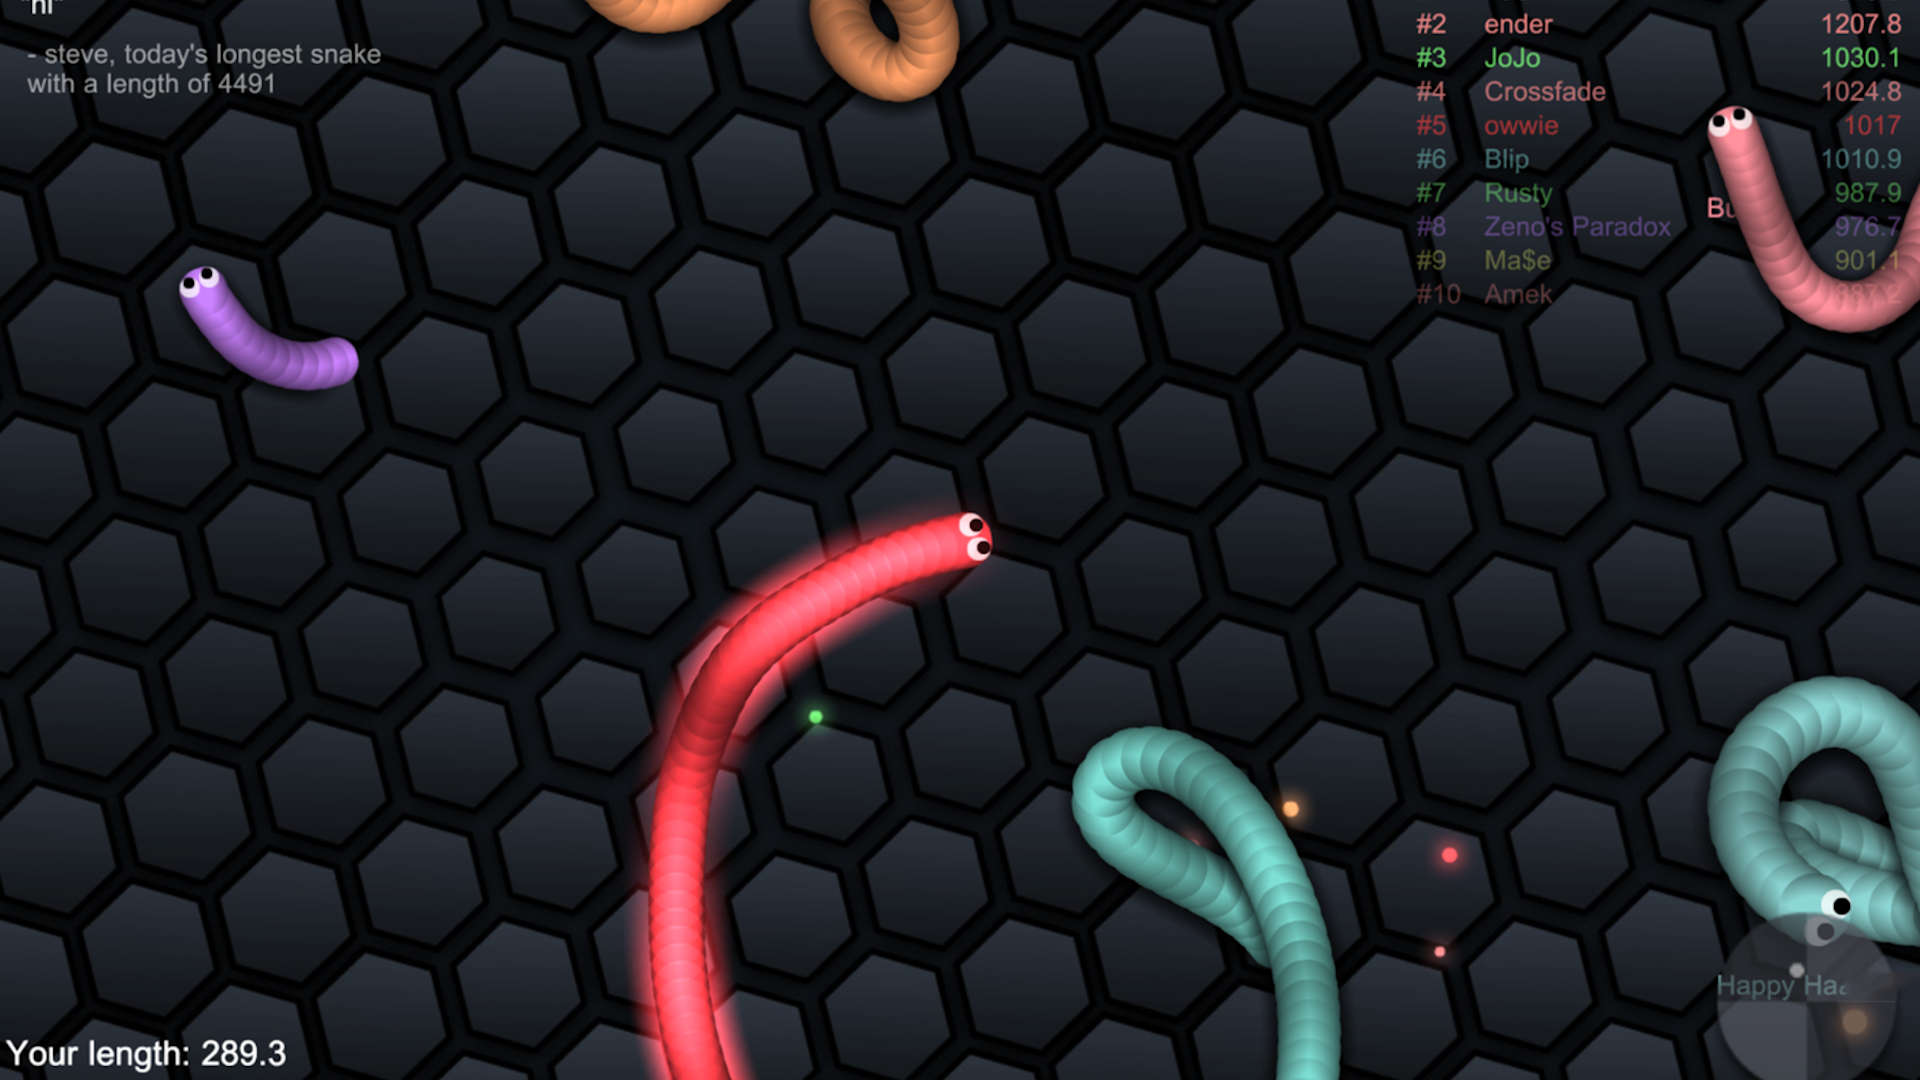 Best browser games: Slither.io. Image shows noodly little creatures slithering around.